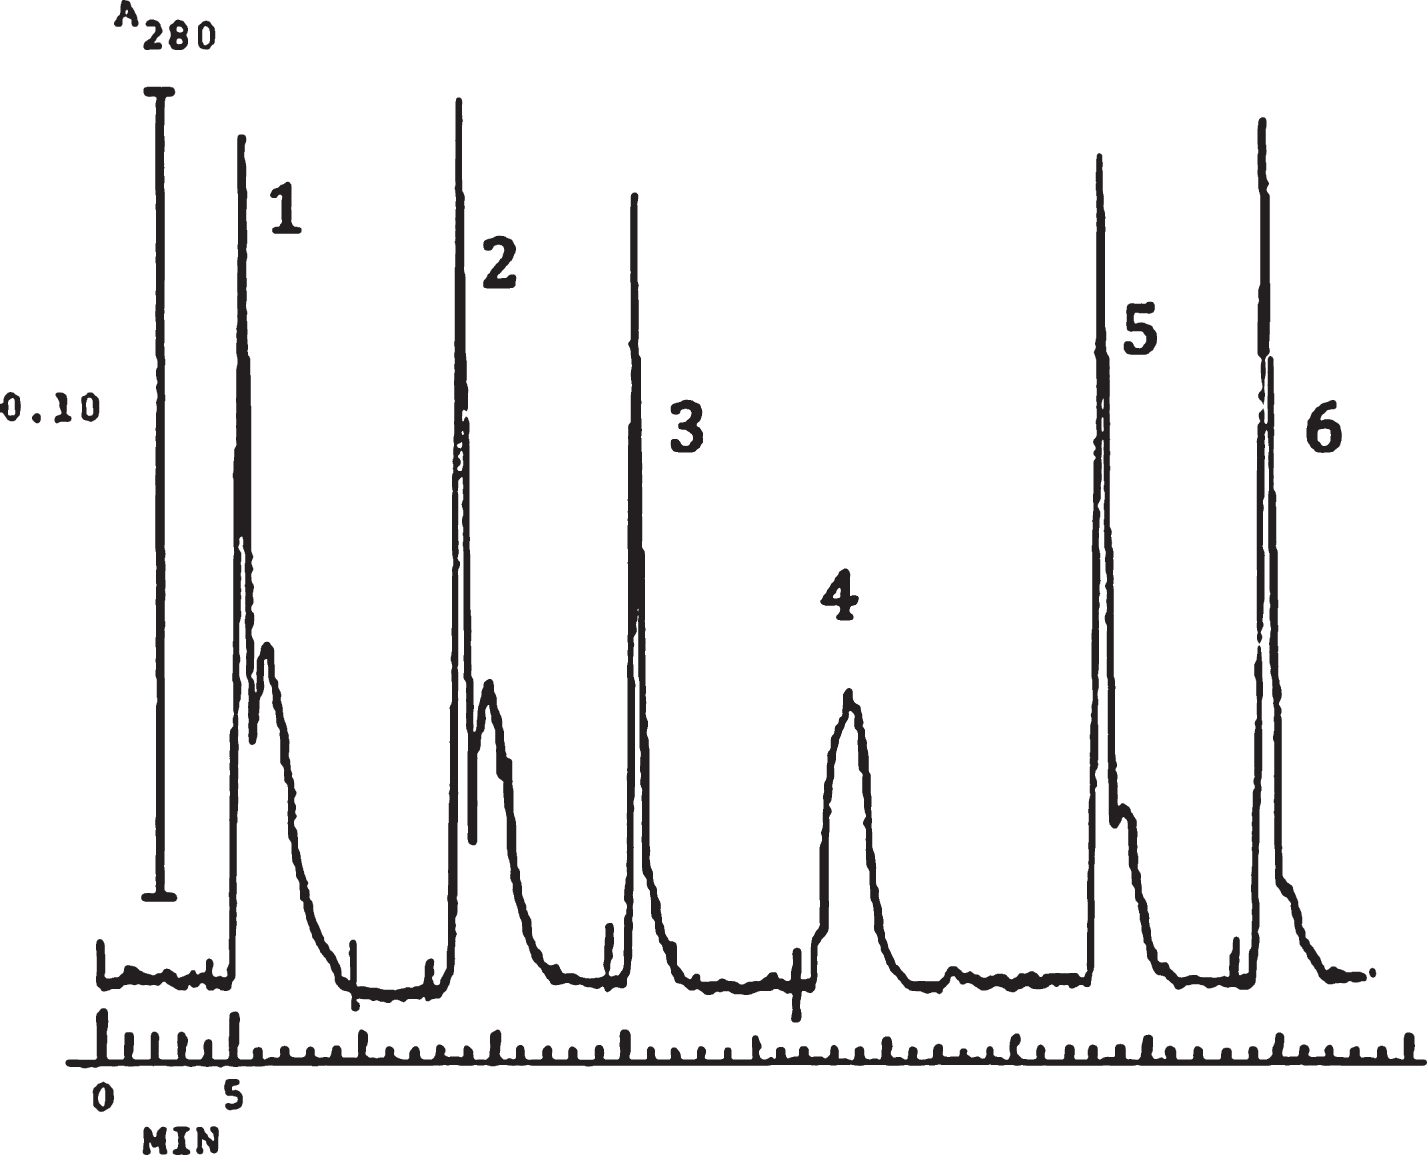 Six successive injections into a 72 cm×0.25 mm I.D., 316 stainless-steel capillary; mobile phase water; flow rate 68 μl/min; UV detector monitoring at 280 nm; 5 μL injections of a 0.13 mg/ml ferritin solution in water. No flushing or cleaning between injections. Permission granted the Journal of Chromatography [18].